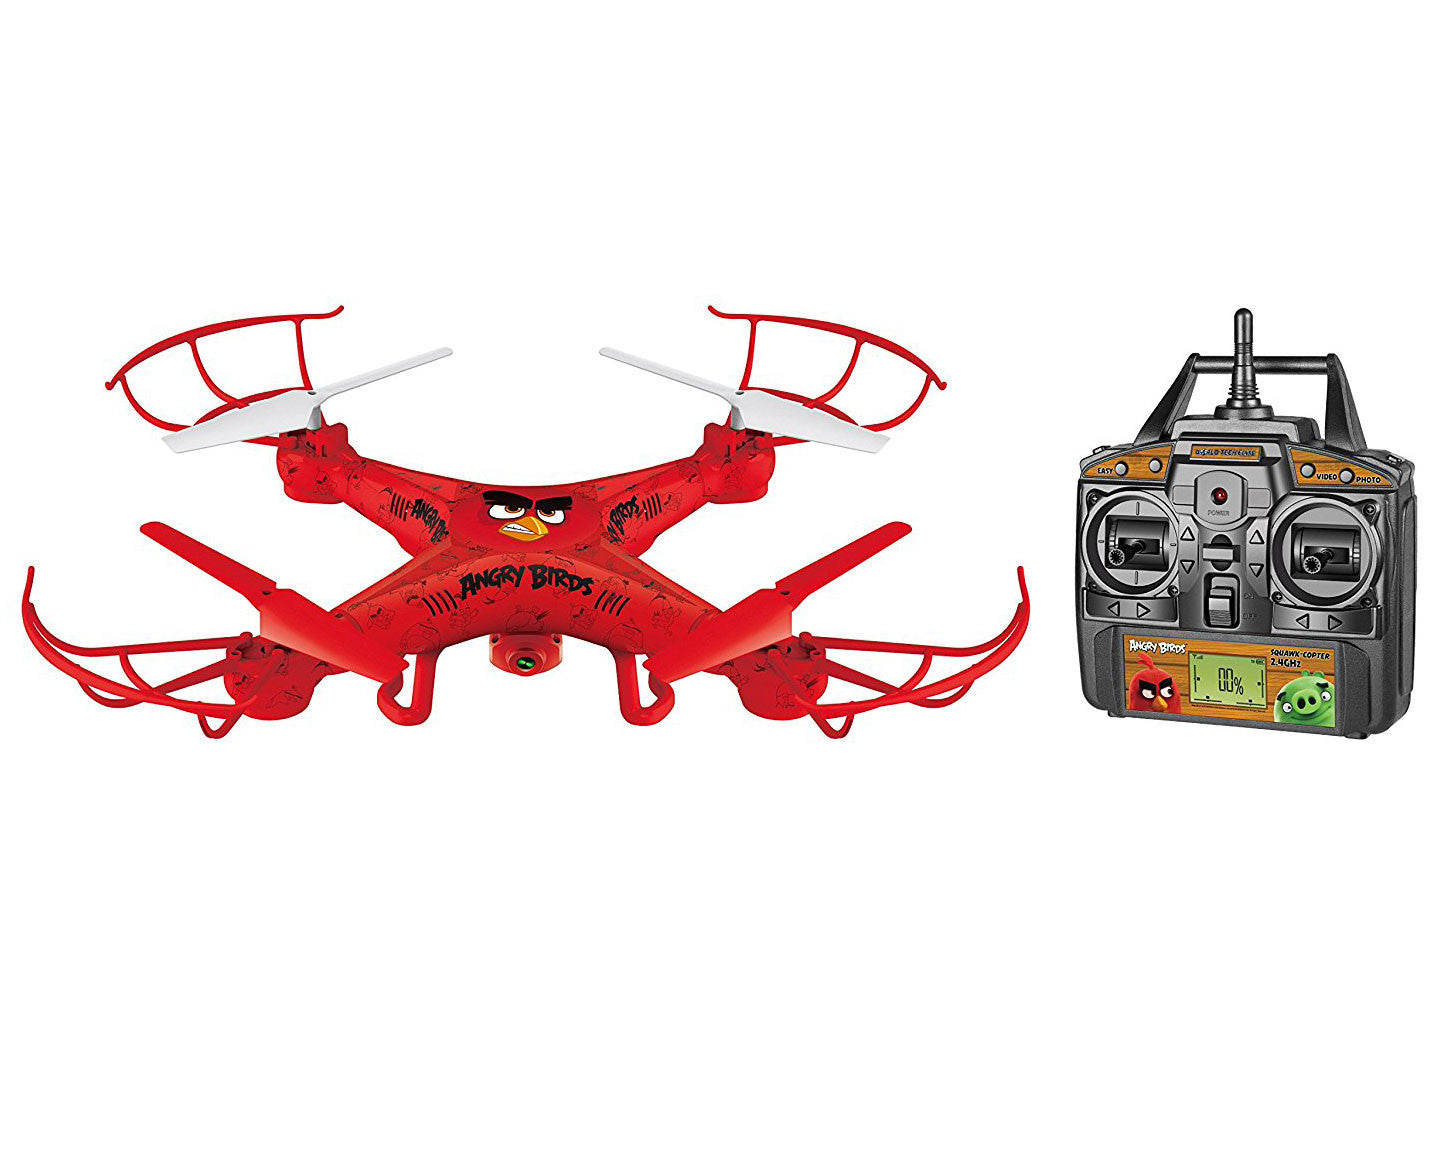 Angry Birds Licensed 4.5-channel 2.4 Ghz Remote Control Camera Drone Squak-copter - Red